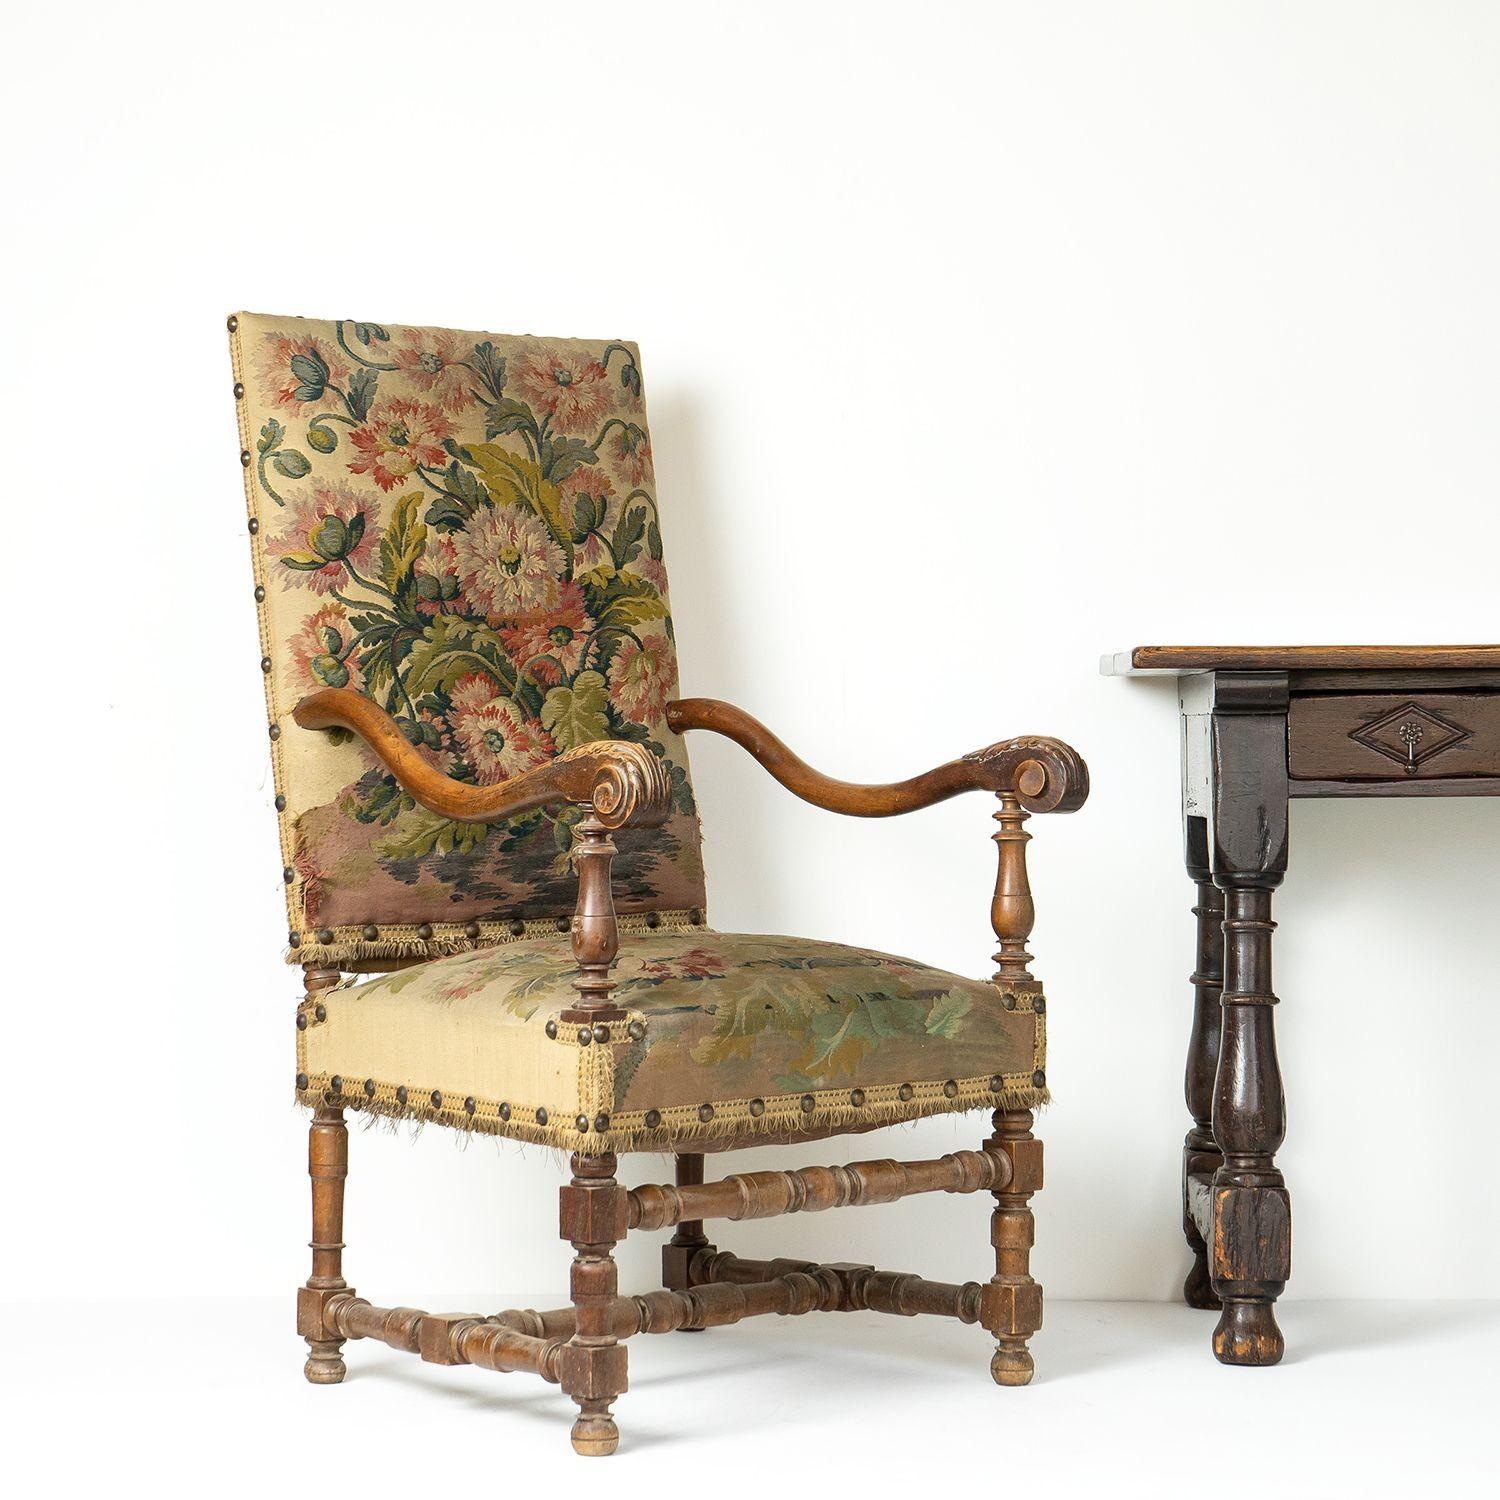 French Walnut Framed Armchair With Poppy Tapestry Upholstery, 19th Century For Sale 10